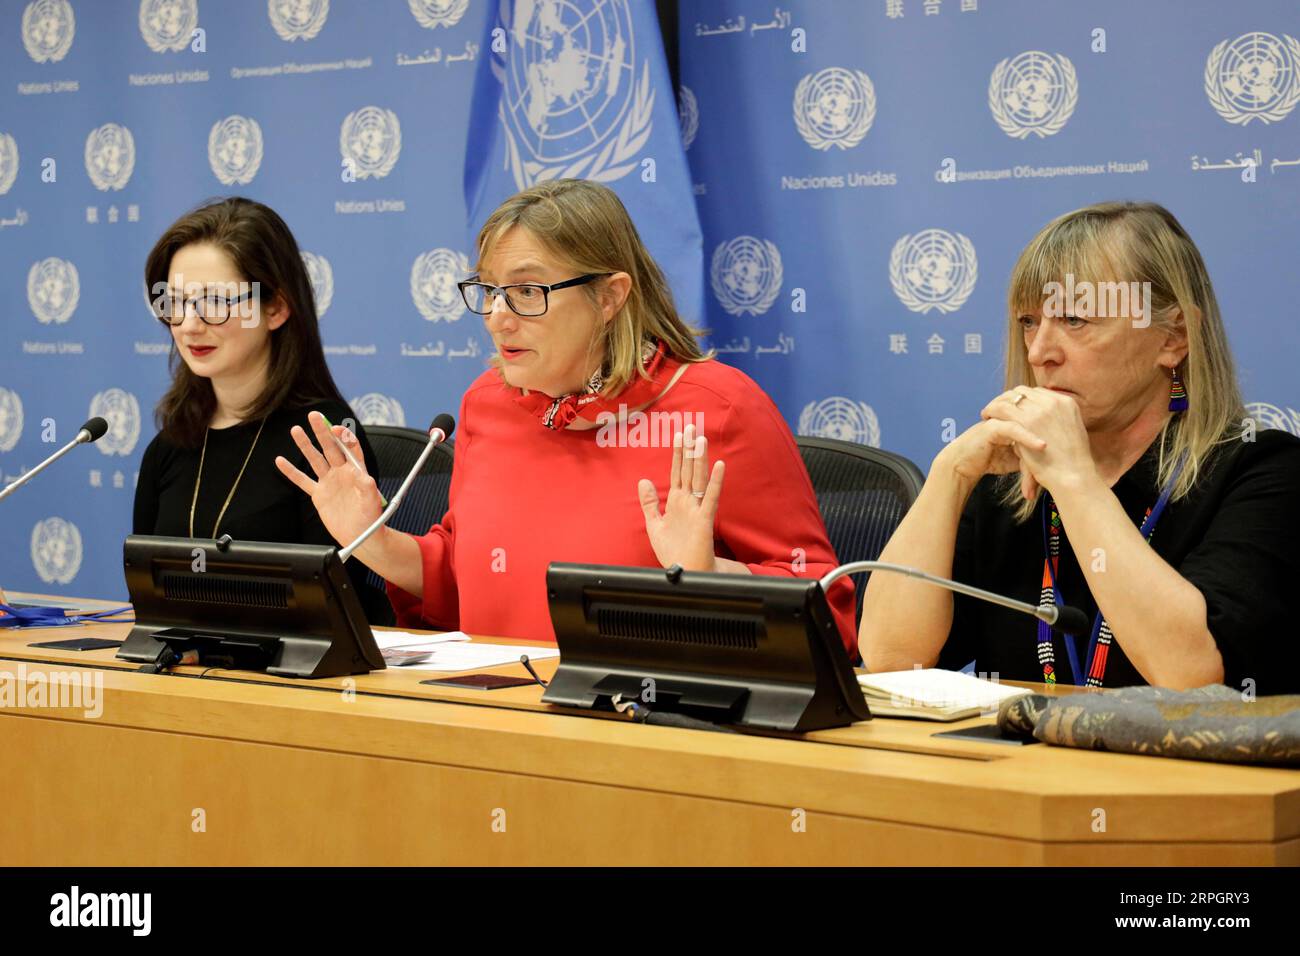 191021 -- UNITED NATIONS, Oct. 21, 2019 -- L-R Liz O Sullivan with the International Committee for Robot Arms Control ICRAC, Mary Wareham, global coordinator of the Campaign to Stop Killer Robots, and Jody Williams, Nobel Peace Prize co-laureate and the founding coordinator of the International Campaign to Ban Landmines ICBL attend a press conference on the Campaign to Stop Killer Robots, at the UN headquarters in New York, Oct. 21, 2019. Mary Wareham on Monday urged the international community to stop developing lethal autonomous weapons systems, or killer robots.  UN-STOP KILLER ROBOTS-PRESS Stock Photo